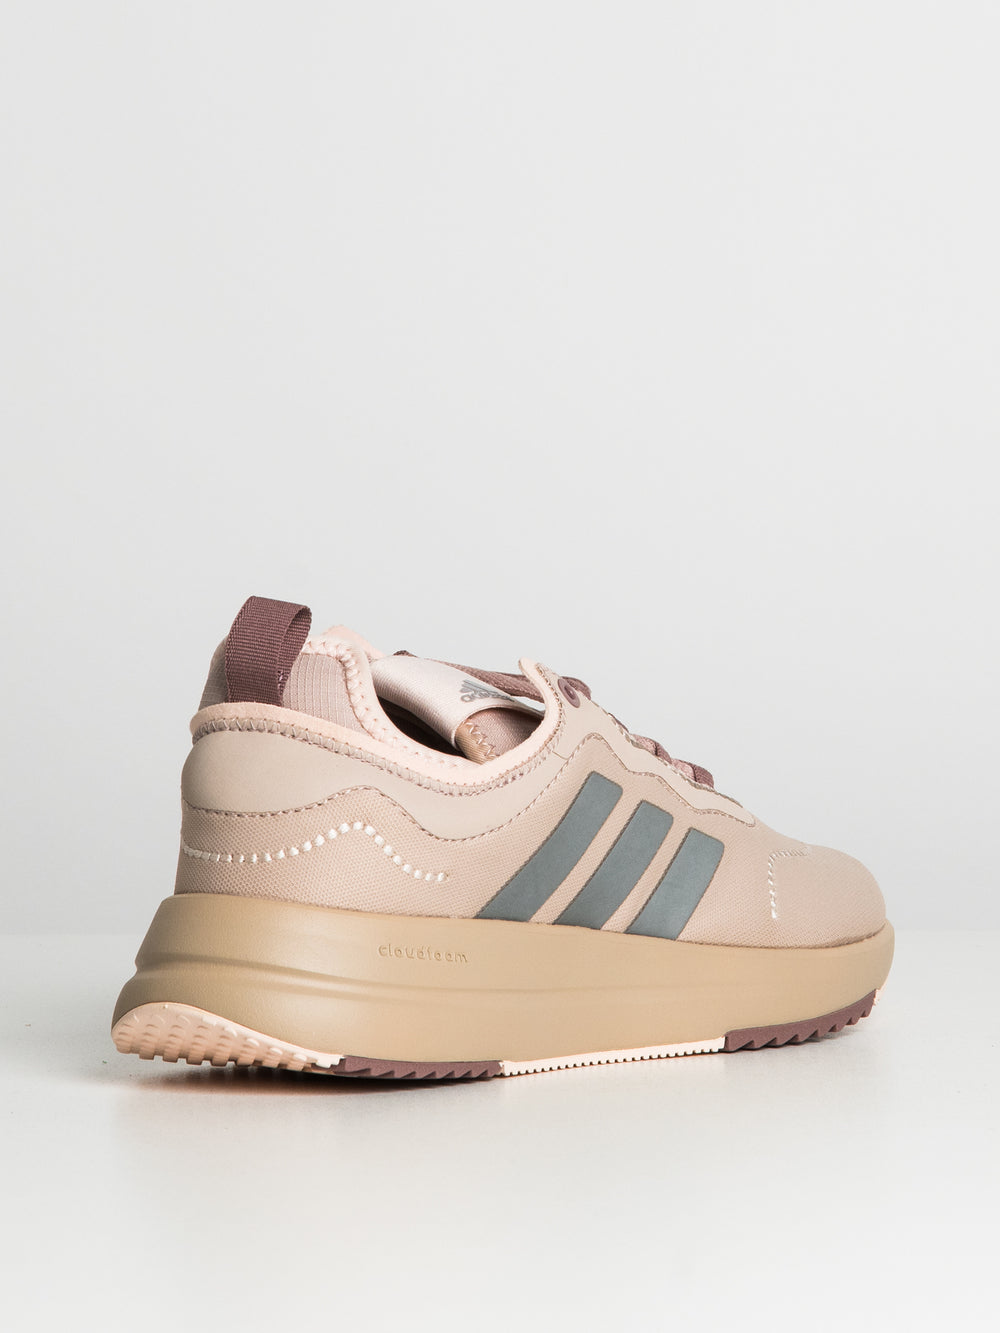 The Best Adidas Sneakers for Women 2020 | POPSUGAR Fitness